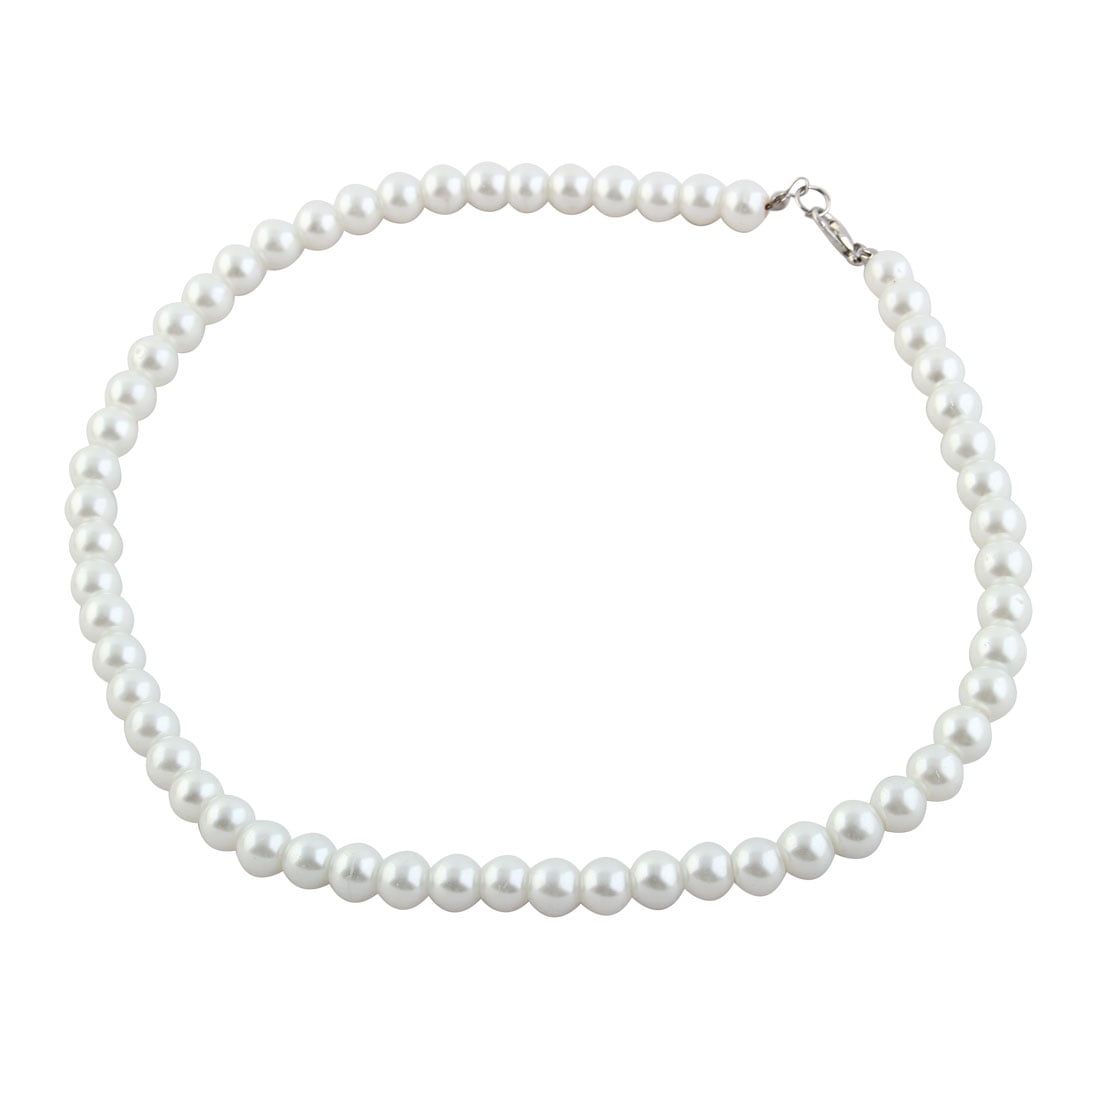 55" 5-9mm White Lavender Rice Freshwater Pearl Necklace Jewelry 